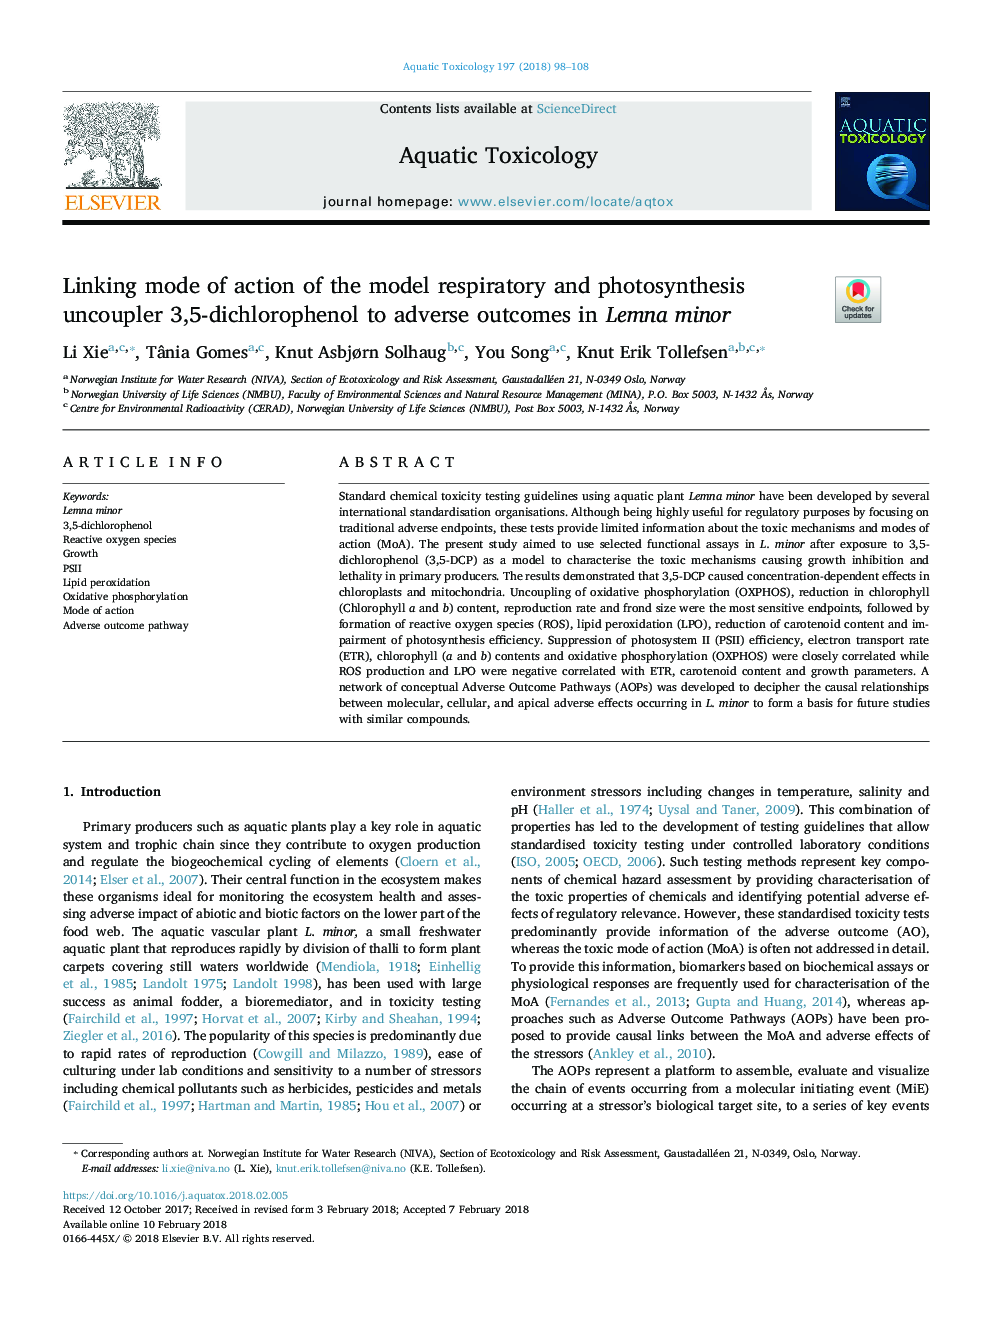 Linking mode of action of the model respiratory and photosynthesis uncoupler 3,5-dichlorophenol to adverse outcomes in Lemna minor